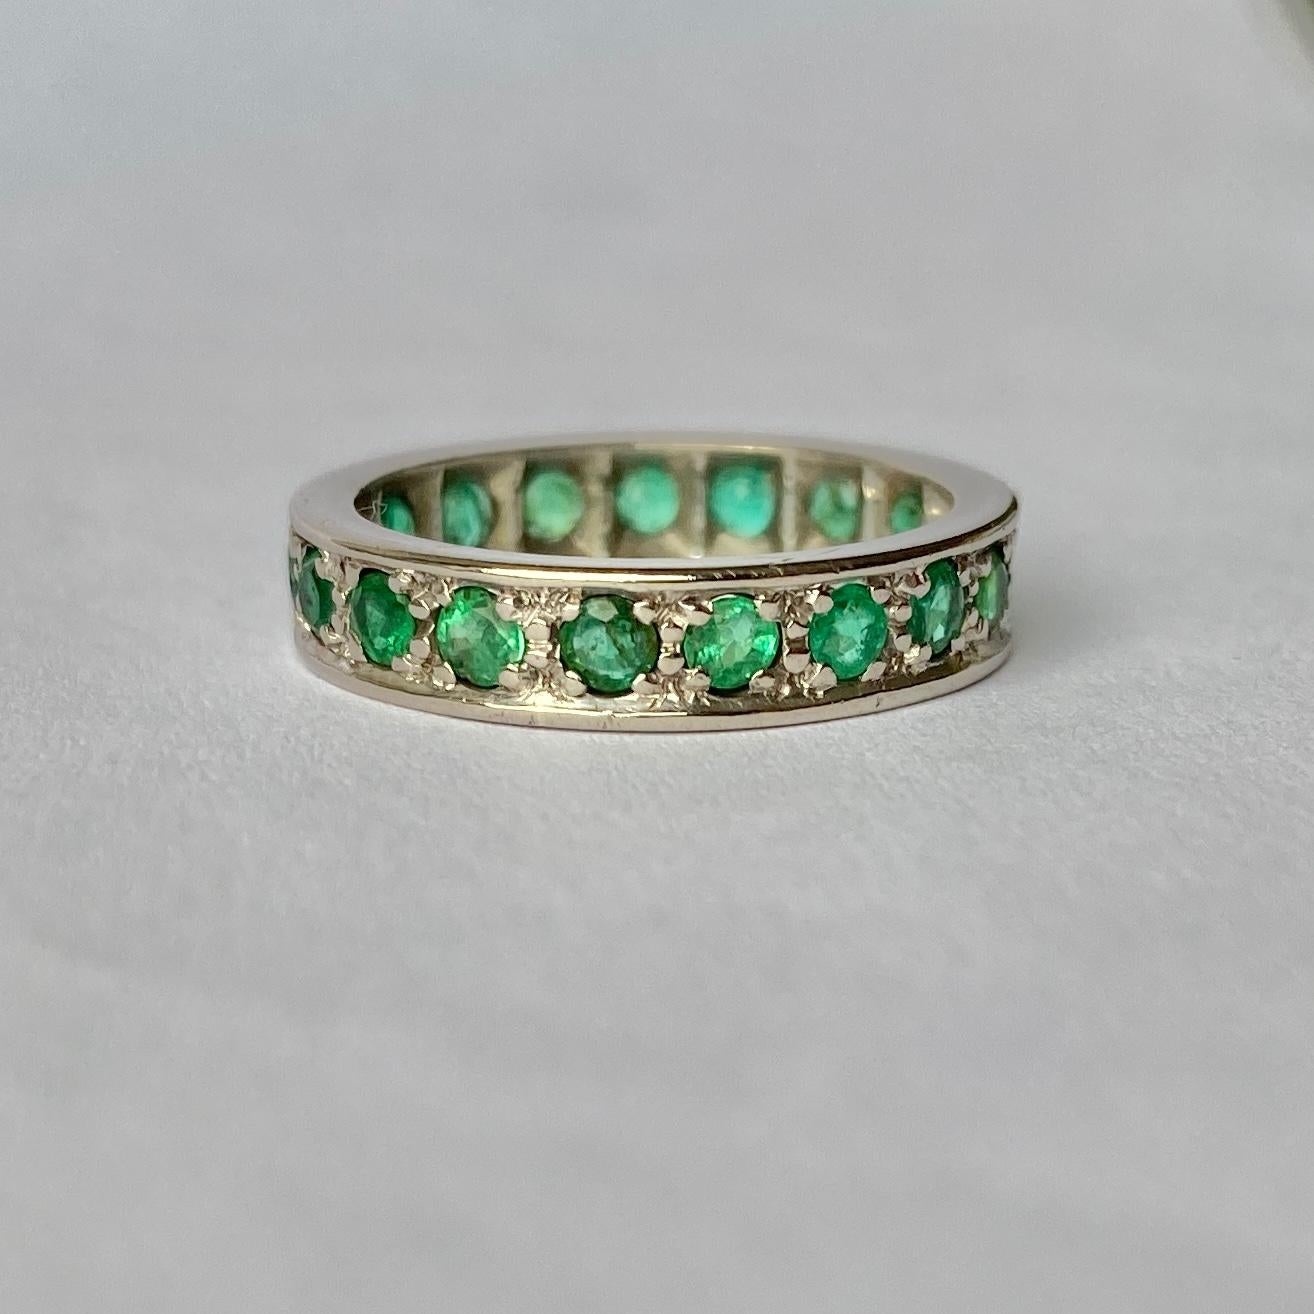 This gorgeously simple emerald full eternity band holds a gorgeous stones which reflect the light beautifully. The stones total approx 1.5carat. 

Ring Size: K 1/2 or 5 1/2 
Band Width: 4mm

Weight: 3.9g